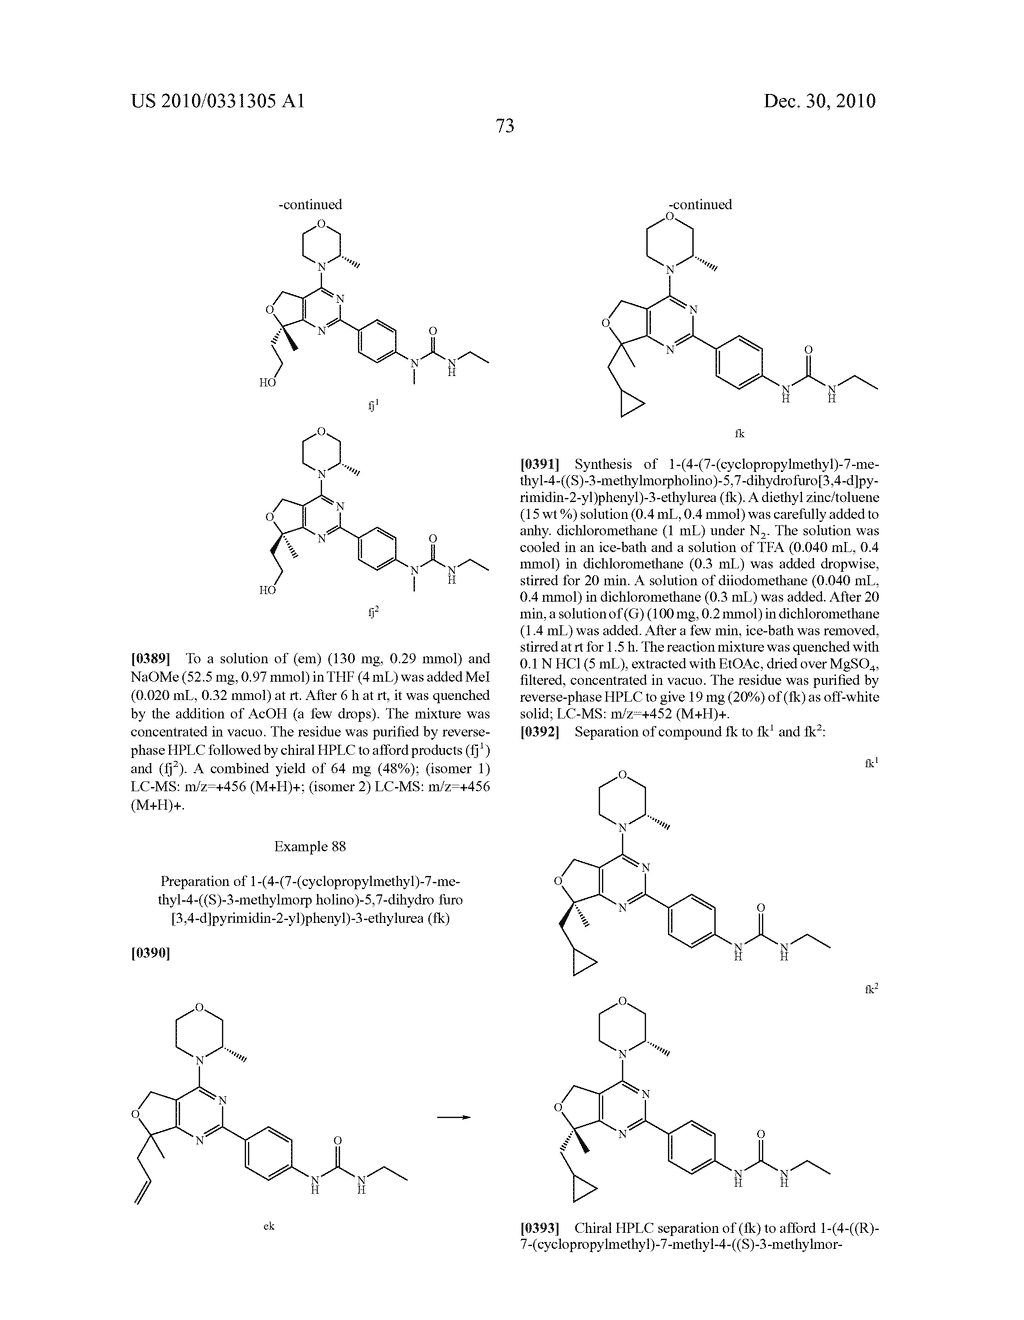 OXO-HETEROCYCLE FUSED PYRIMIDINE COMPOUNDS, COMPOSITIONS AND METHODS OF USE - diagram, schematic, and image 77